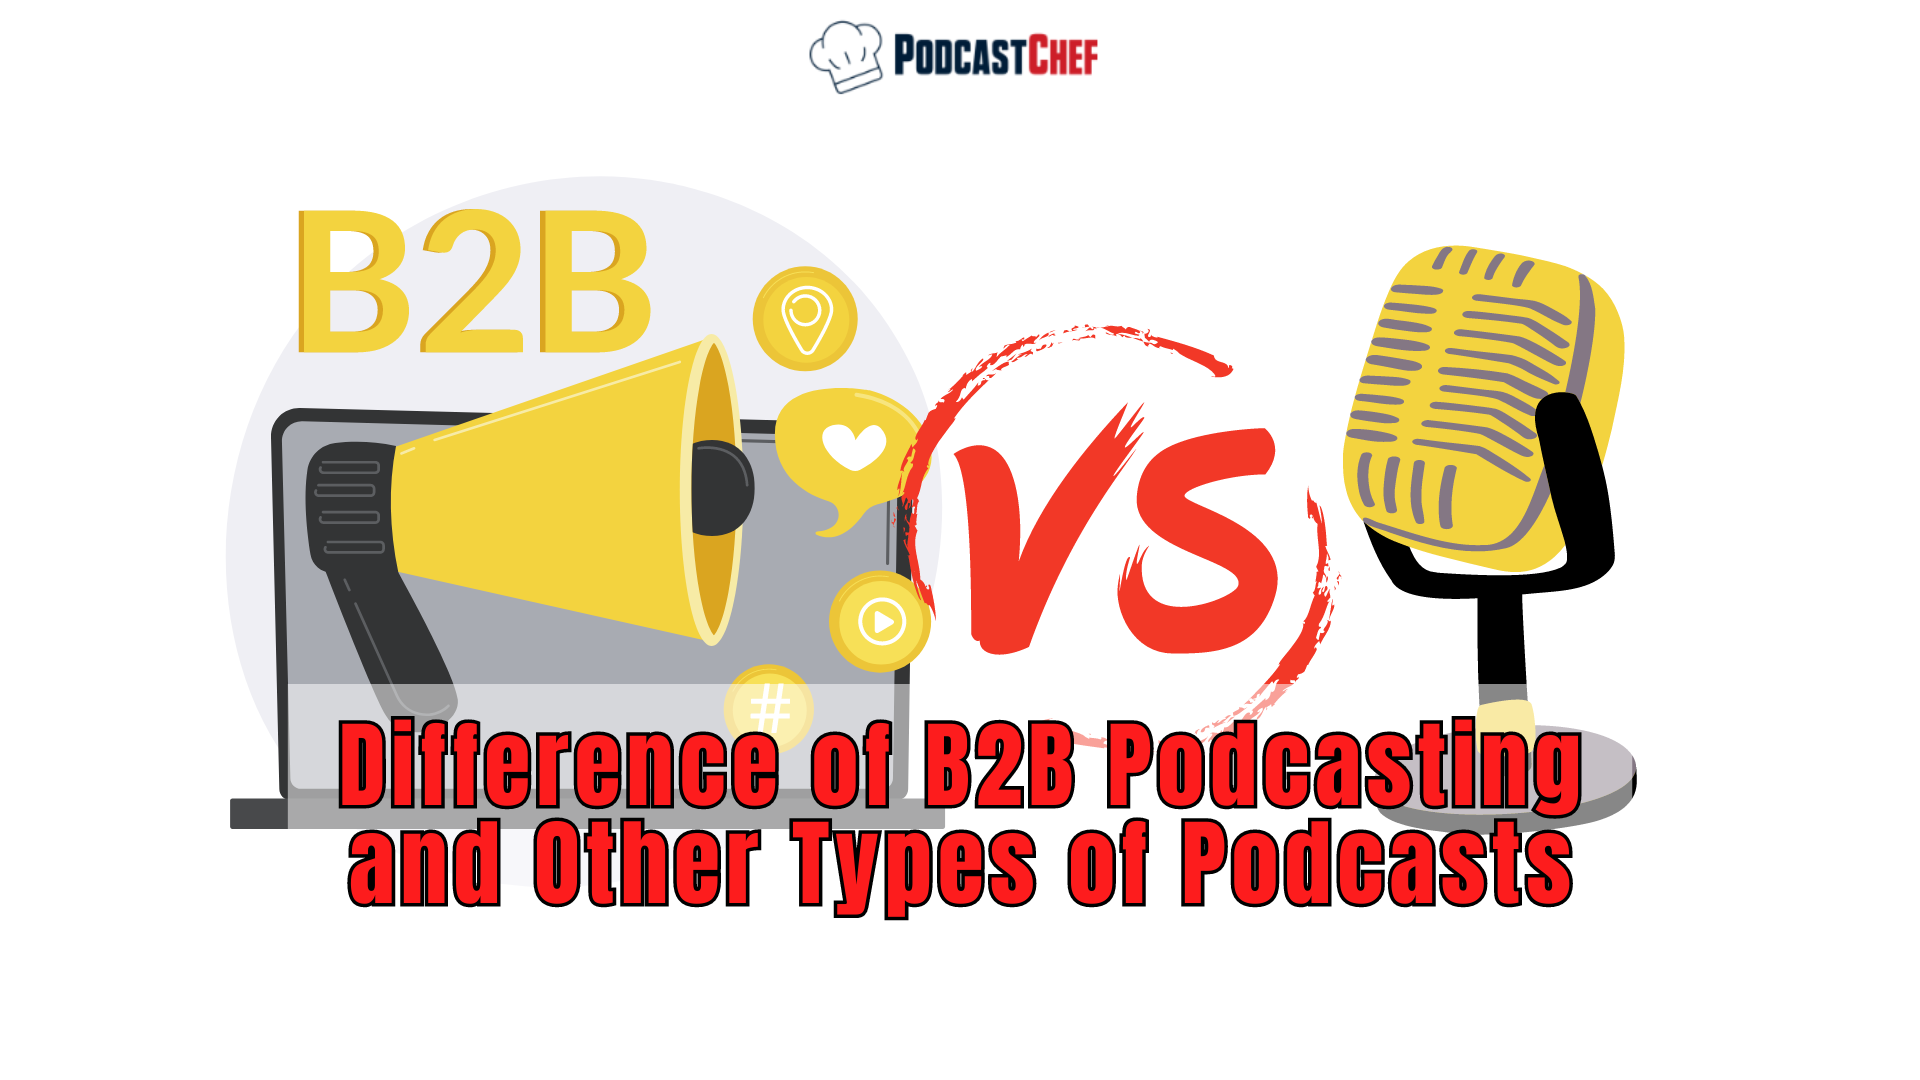 Differences of Podcasts: B2B Podcasting